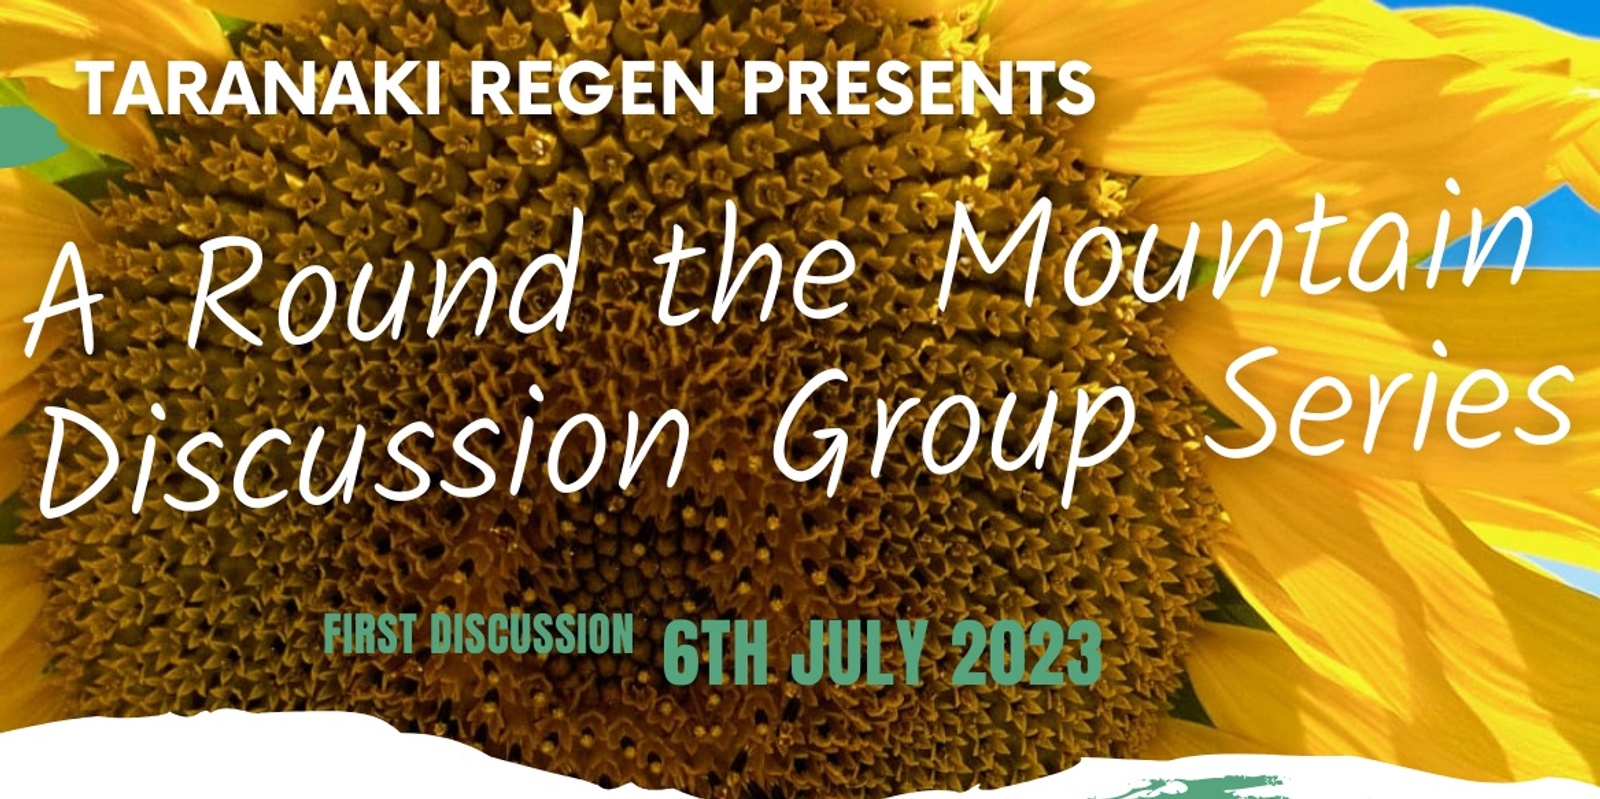 Banner image for Taranaki ReGen Presents: Discussion Group Series 1 of 6